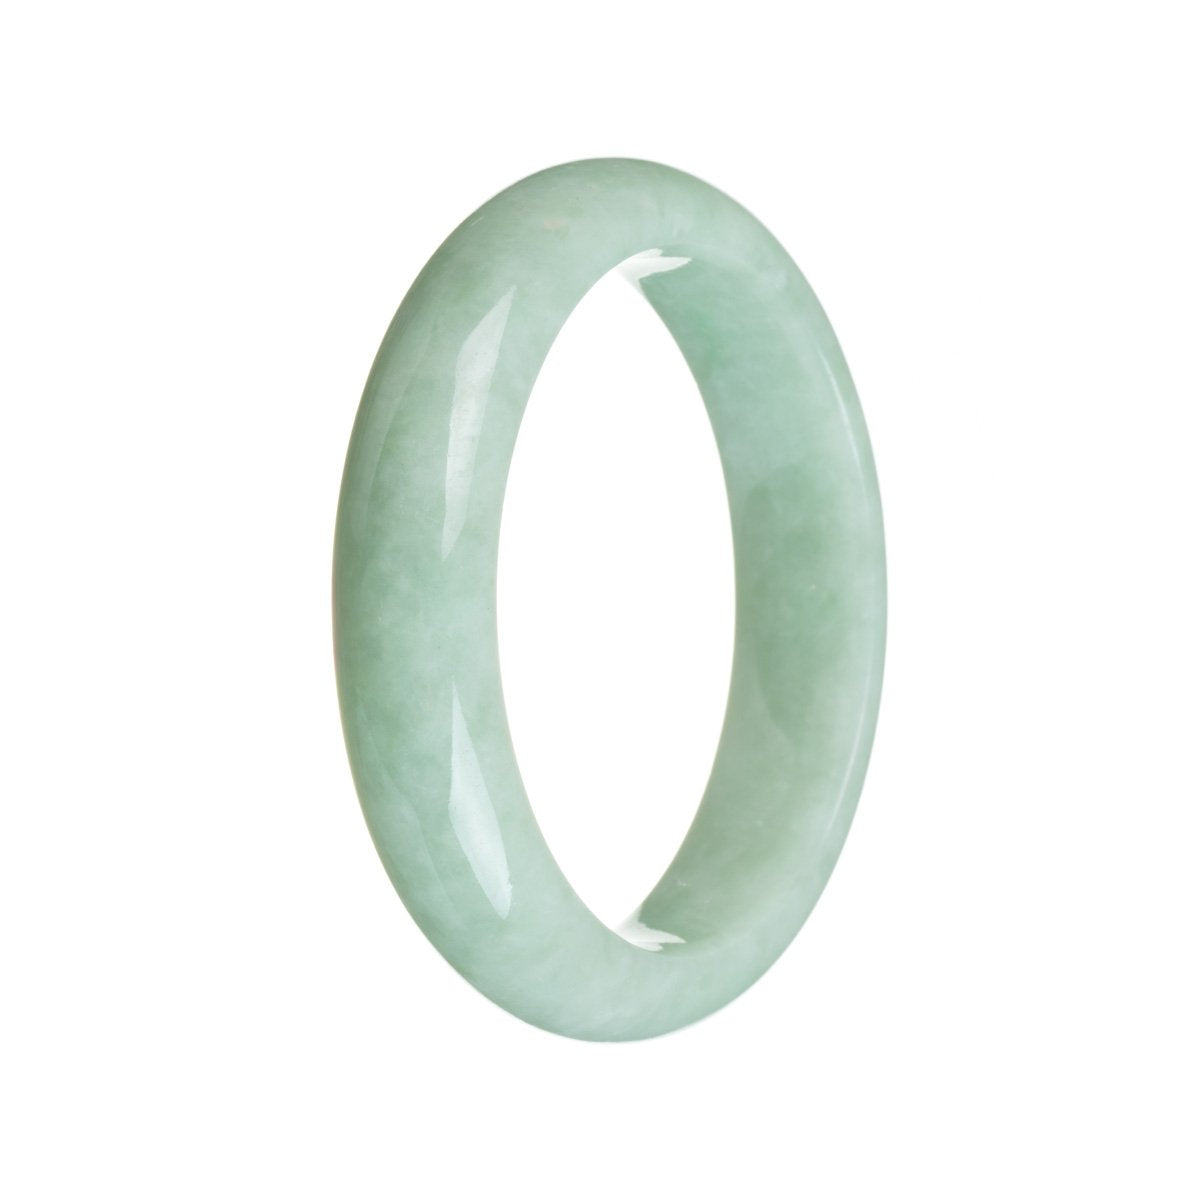 A light green traditional jade bangle bracelet with a half moon shape, measuring 57mm. Certified as untreated. A beautiful piece from MAYS GEMS.